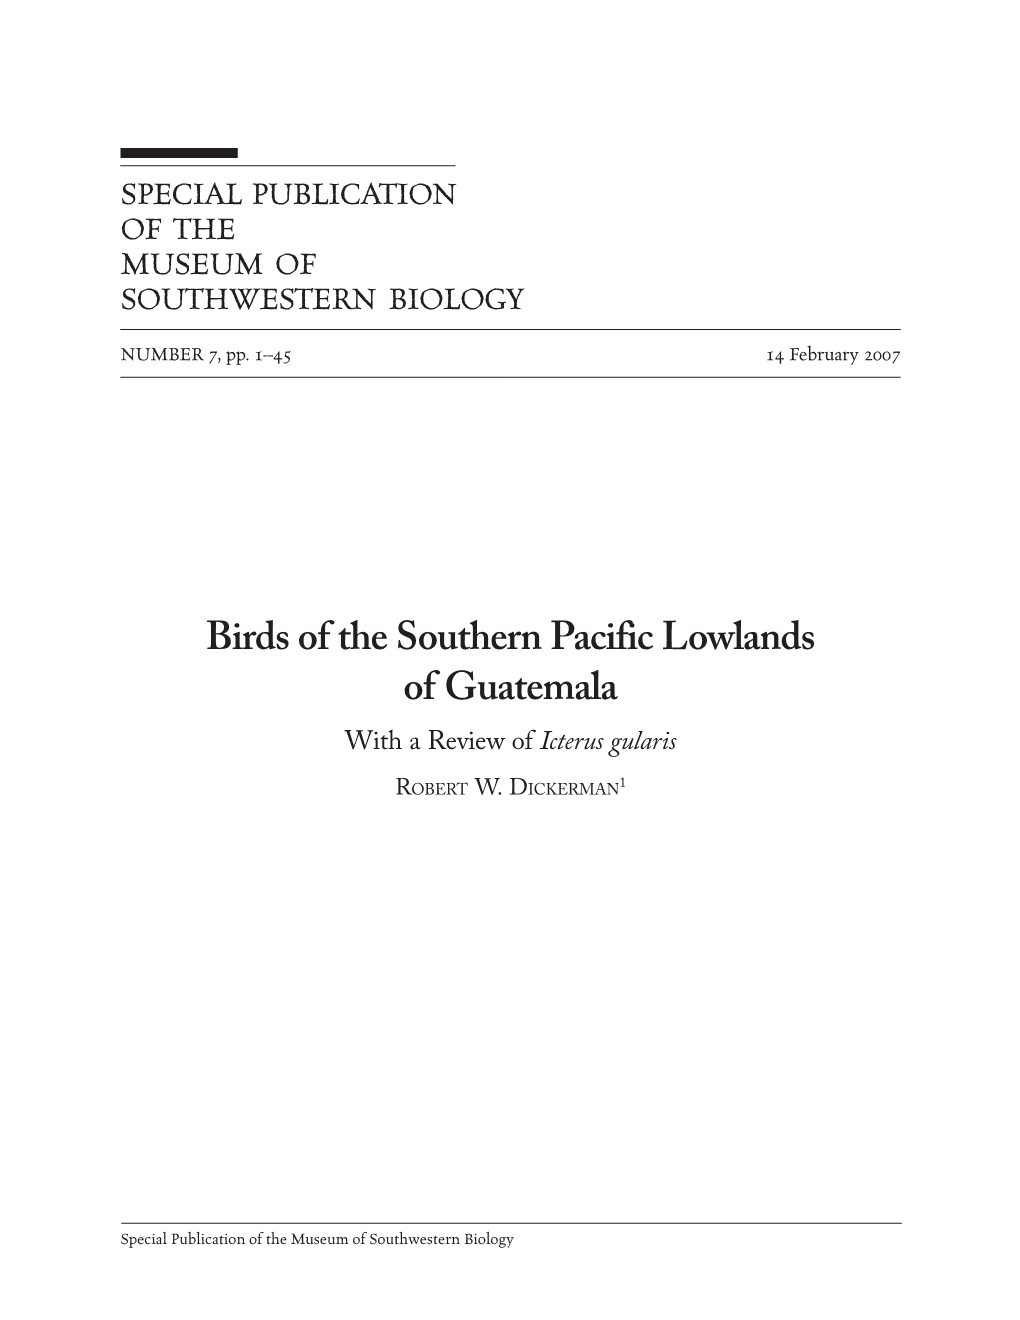 Birds of the Southern Pacific Lowlands of Guatemala. with a Review Of